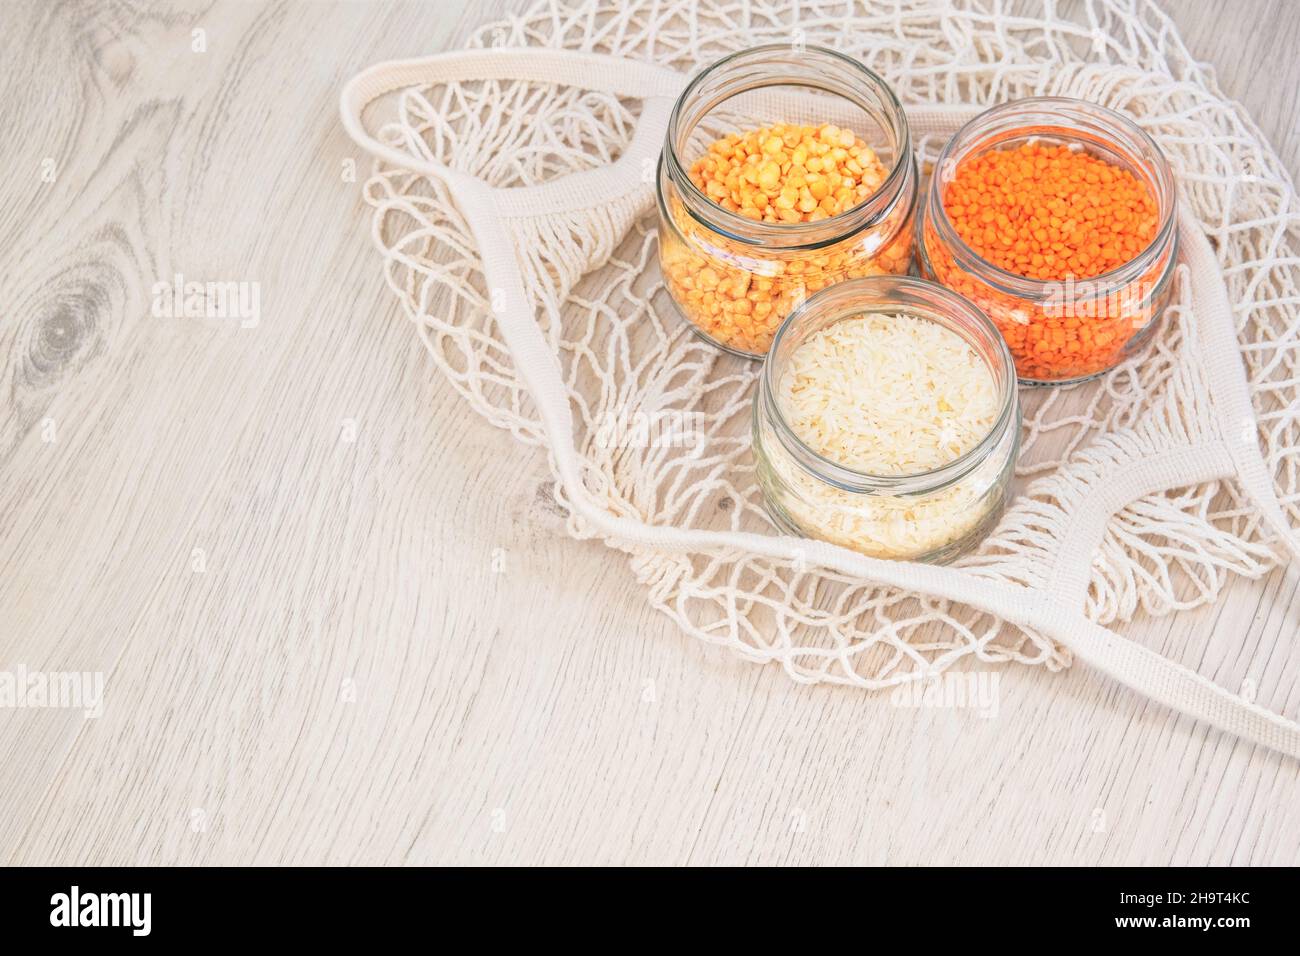 Grains and cereals in zero waste shop. Foods storage in kitchen at low waste lifestyle. Lentils, peas and rice in glass jars on wooden background. Eco Stock Photo